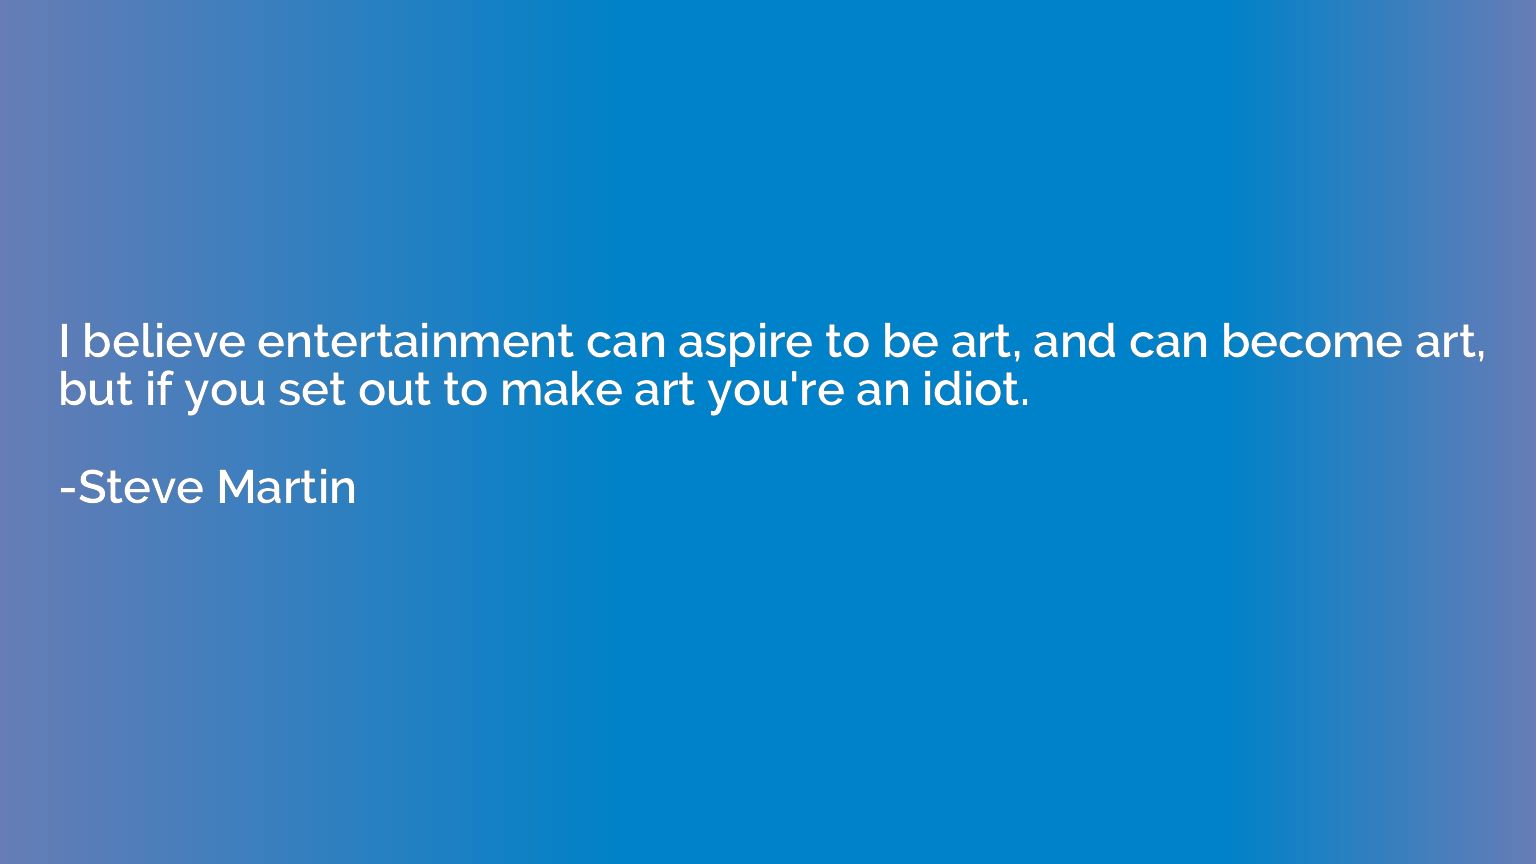 I believe entertainment can aspire to be art, and can become